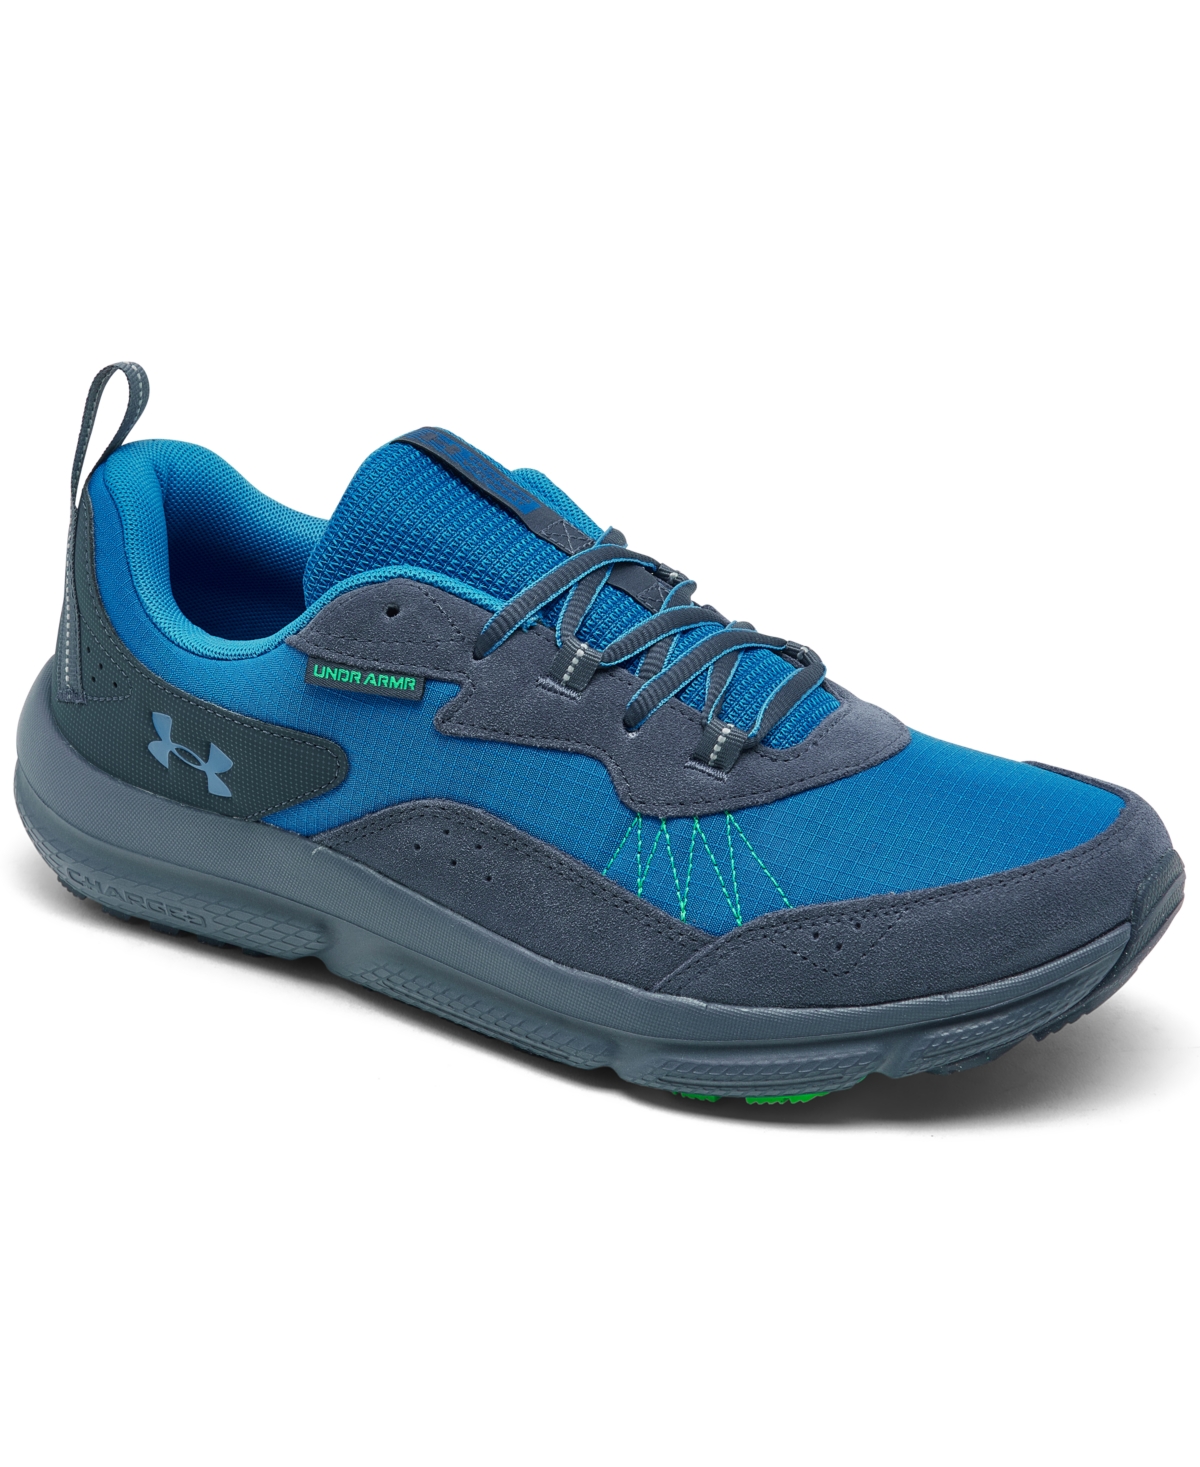 Under Armour Men's Charged Verssert 2 Running Sneakers From Finish Line In Photon Blue,grey